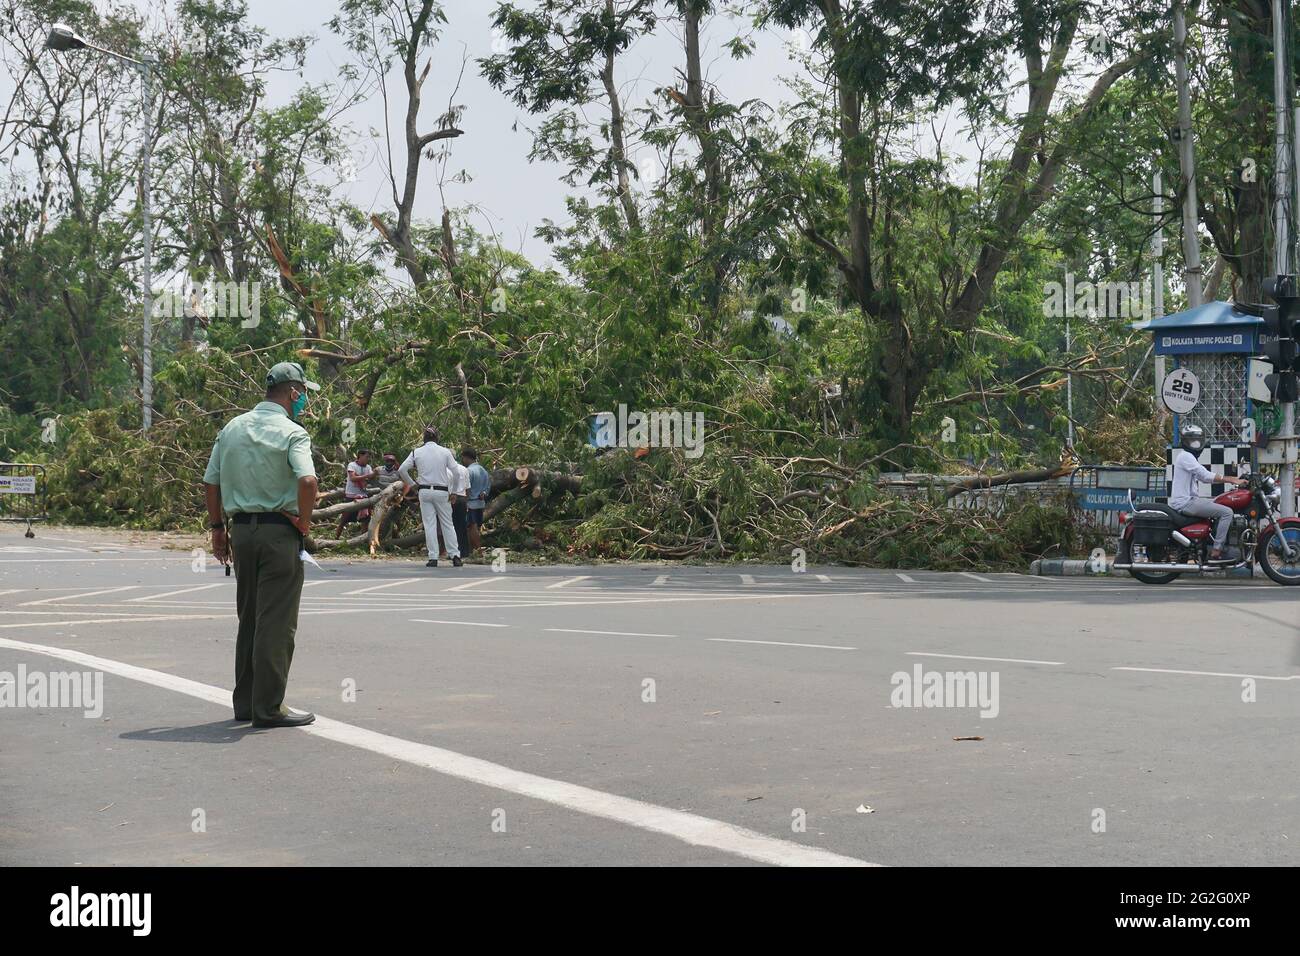 Kolkata, West Bengal, India - 22nd May 2020 : Goverment Officials supervising removal of uprooted tree which fell and blocked road partially, caused b Stock Photo